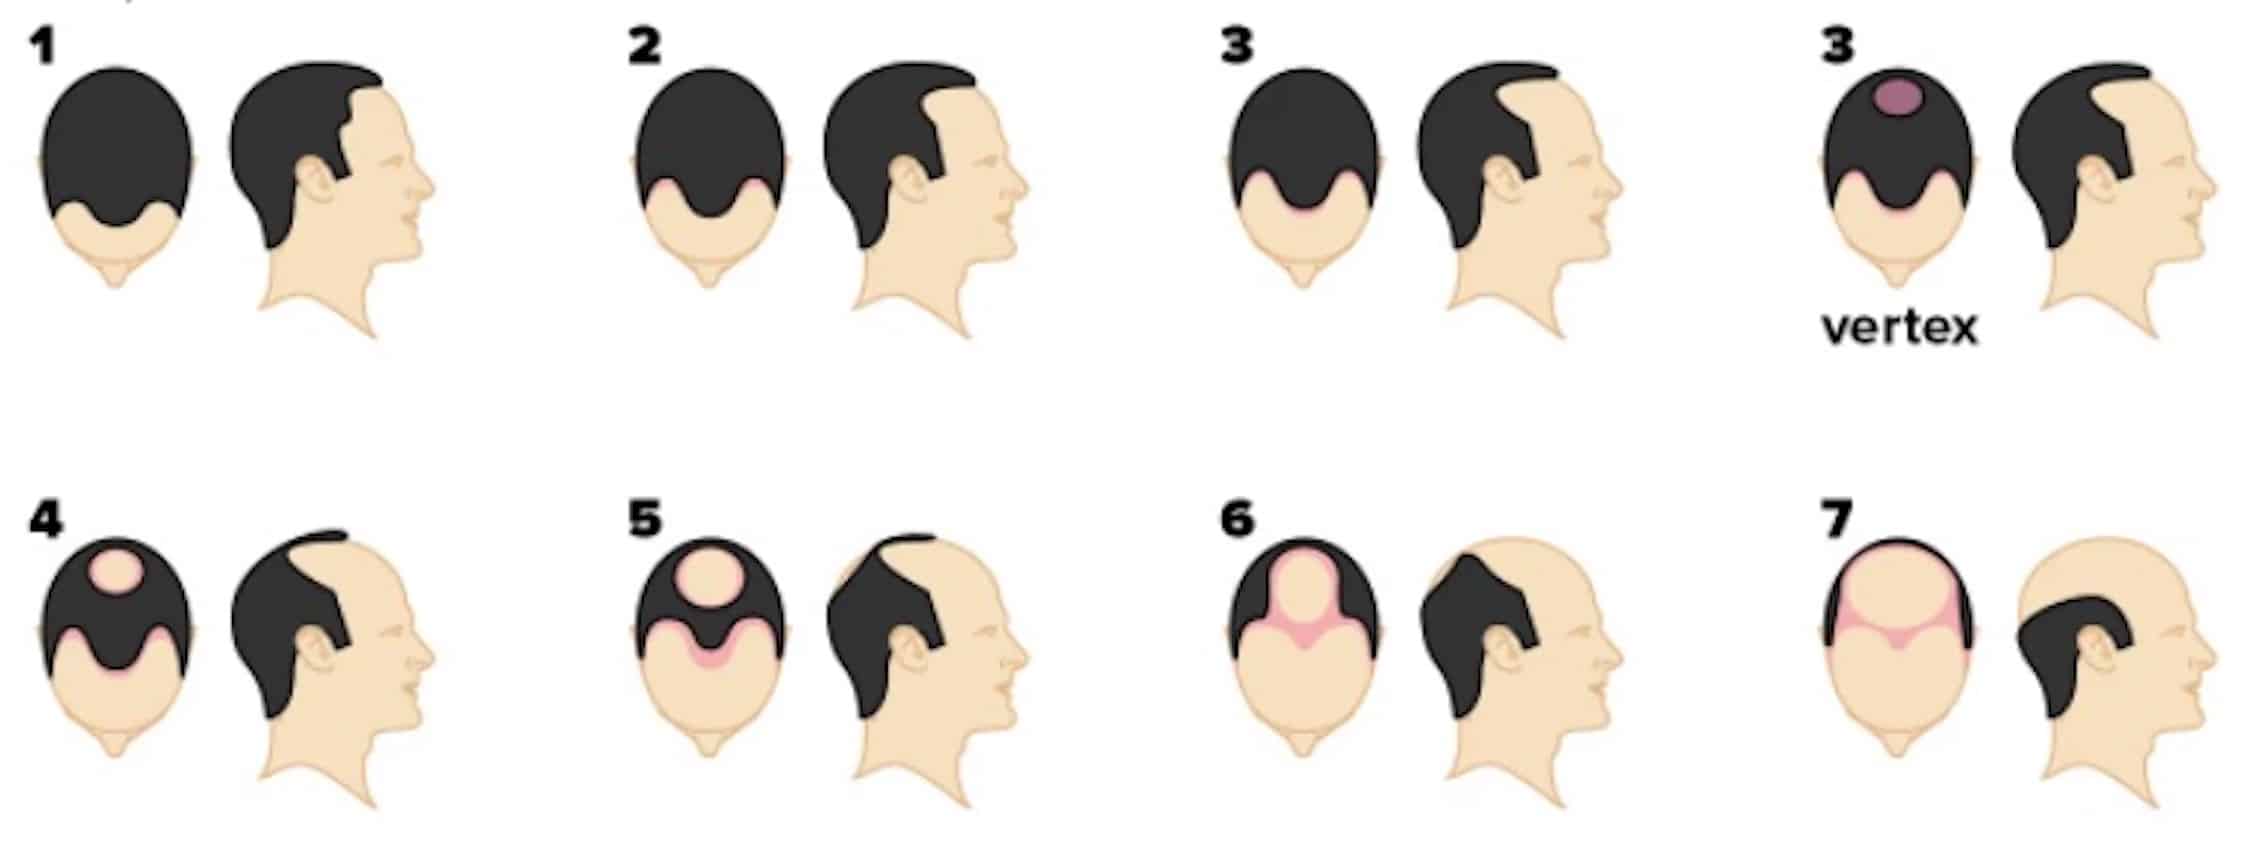 stages of a hair transplant